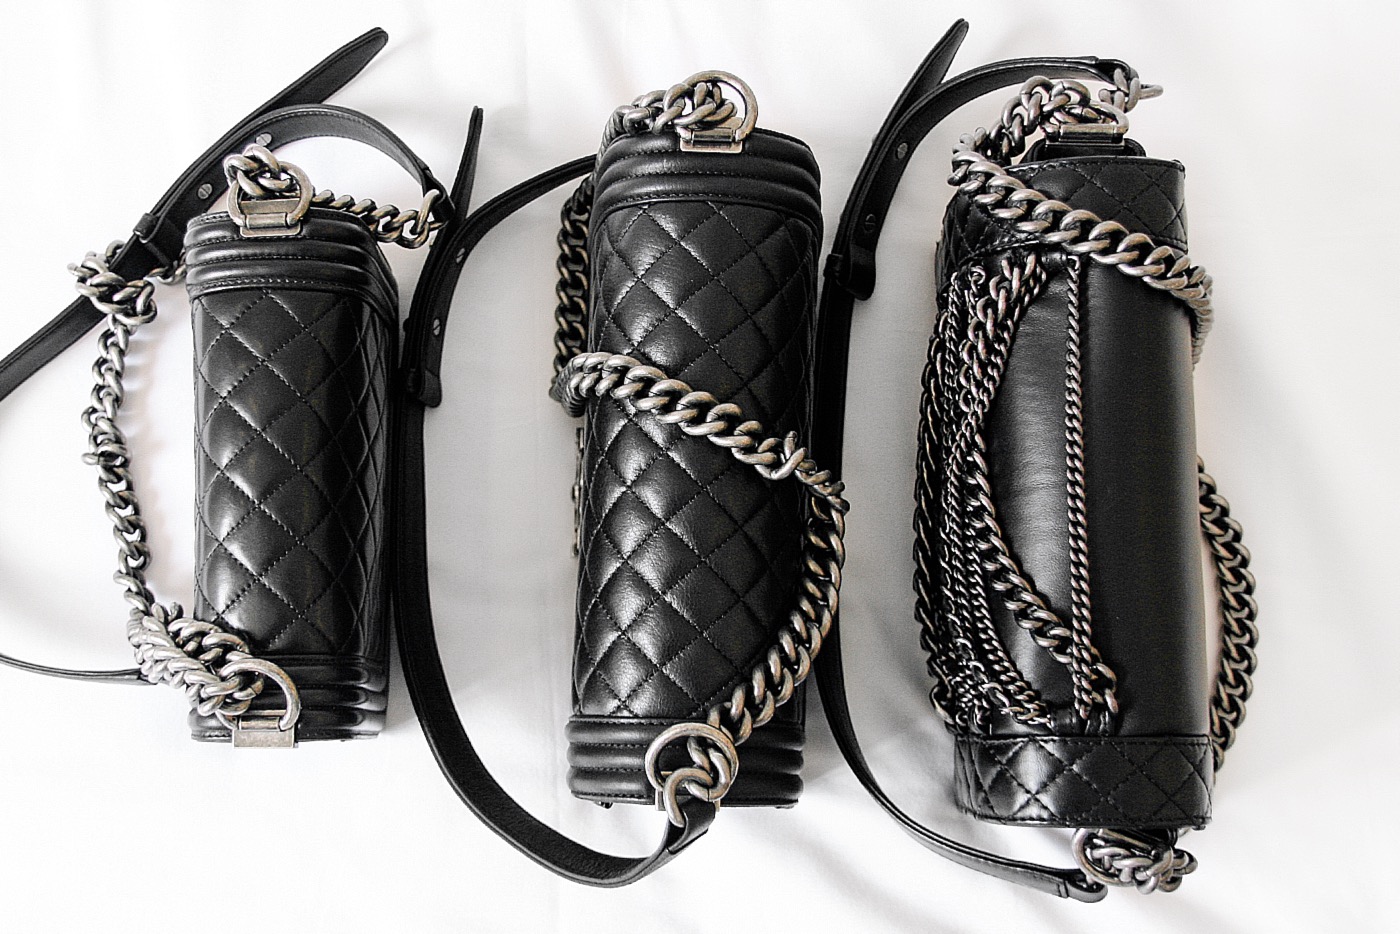 The Chanel Boy Bag – inspired by Gabrielle Chanel